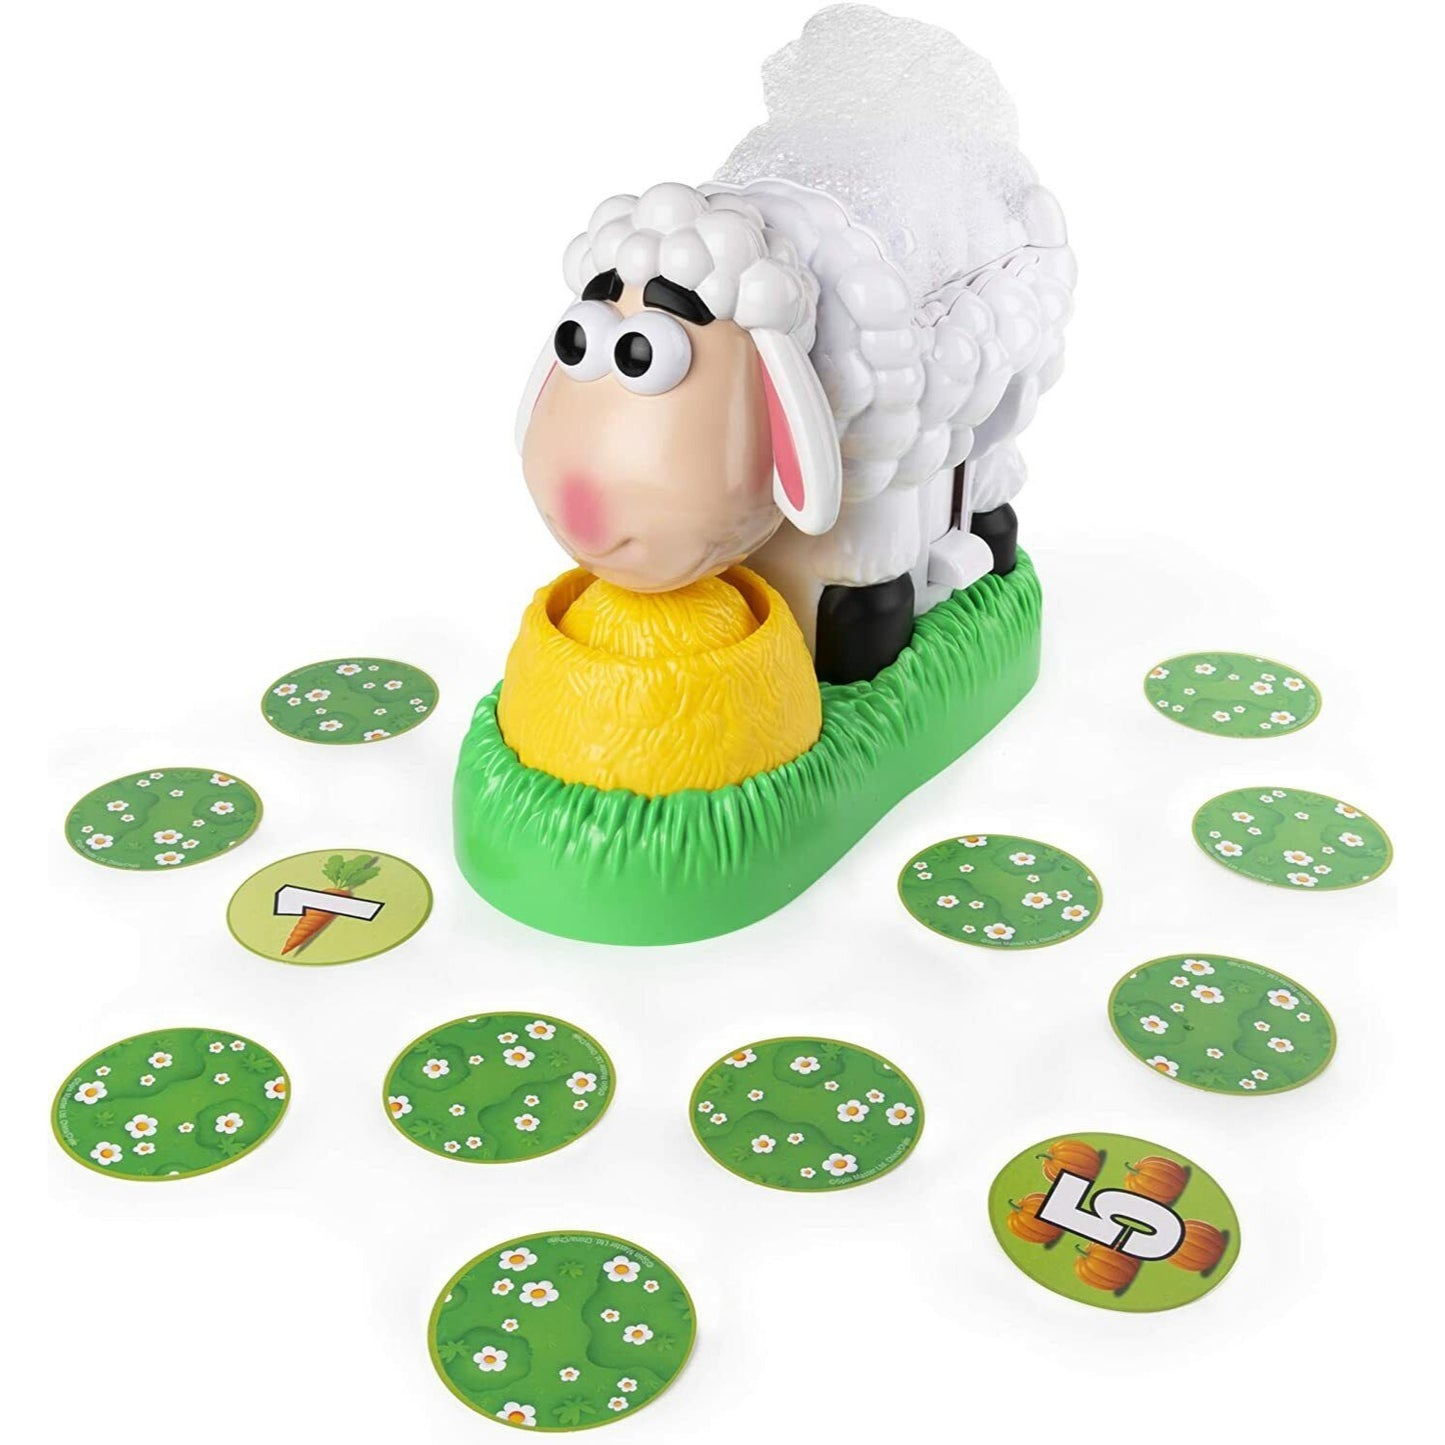 Game Baa Baa Bubbles, Bubble-Blasting with Interactive Sneezing Sheep, for Kids